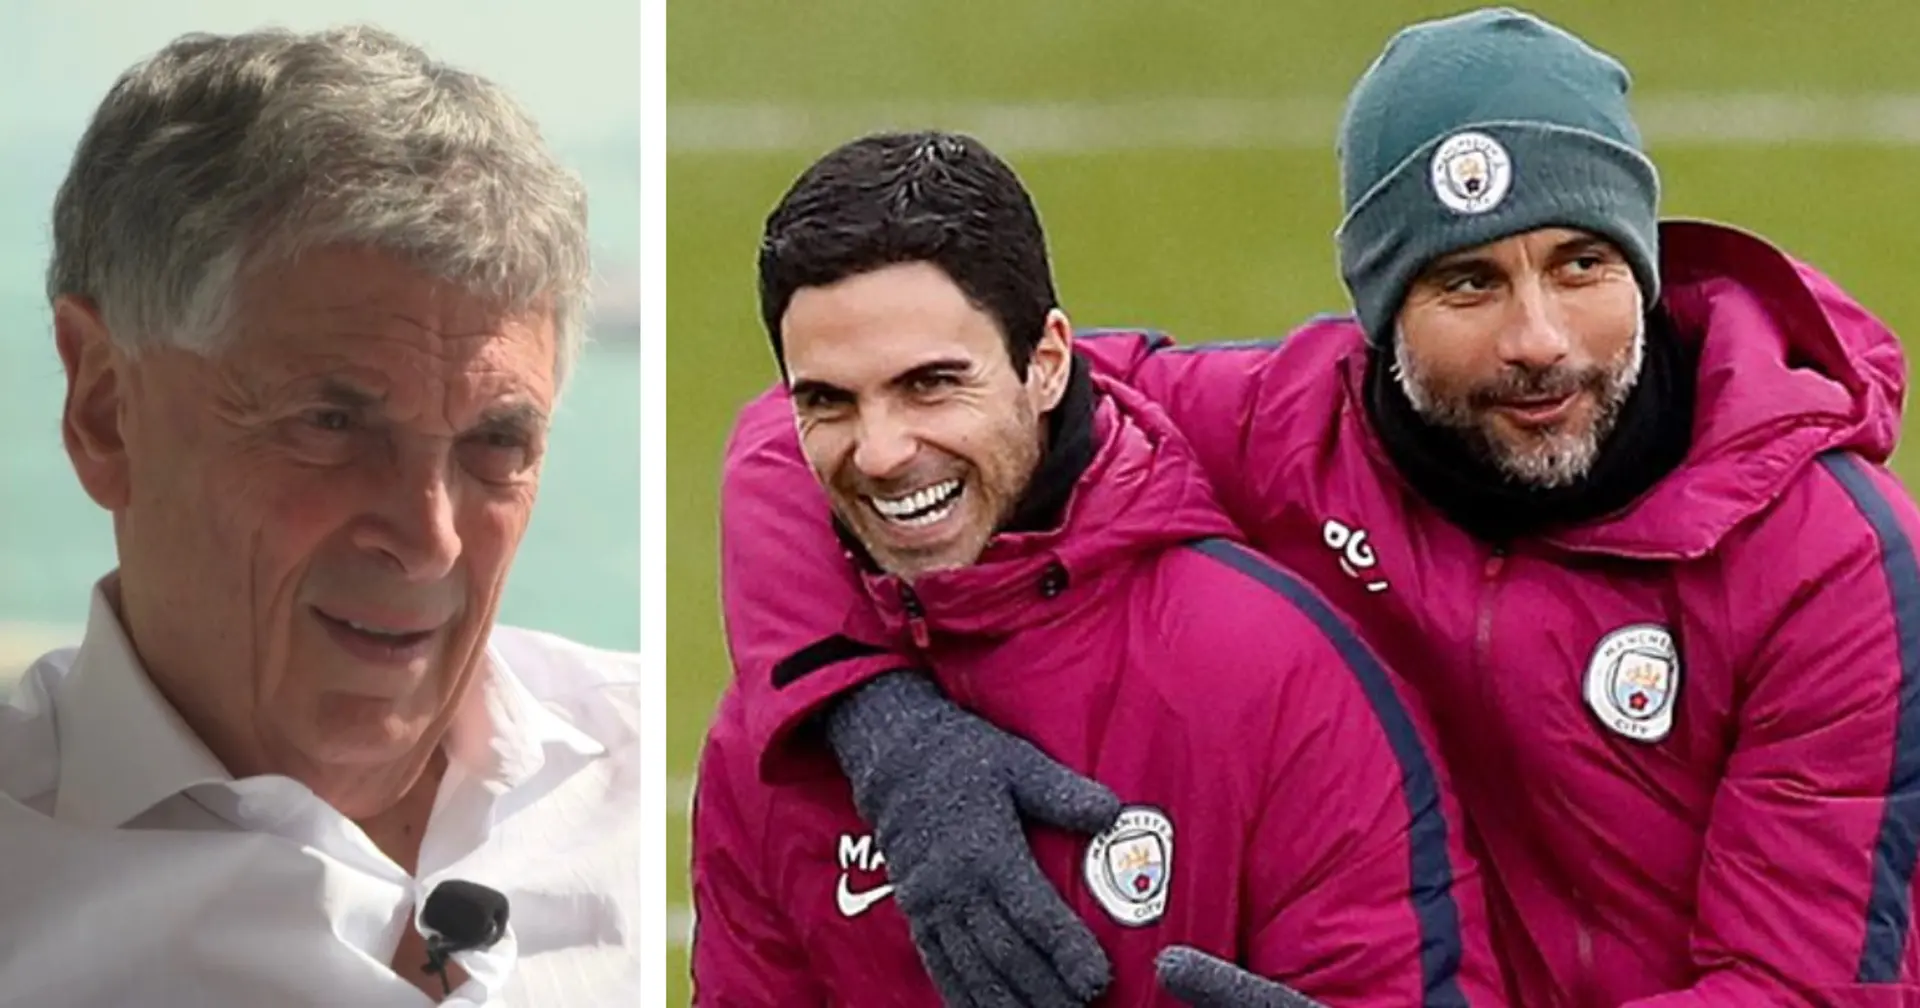 'He's had a good intuition from Wenger and Guardiola': David Dein not surprised by Arteta's Arsenal turnaround